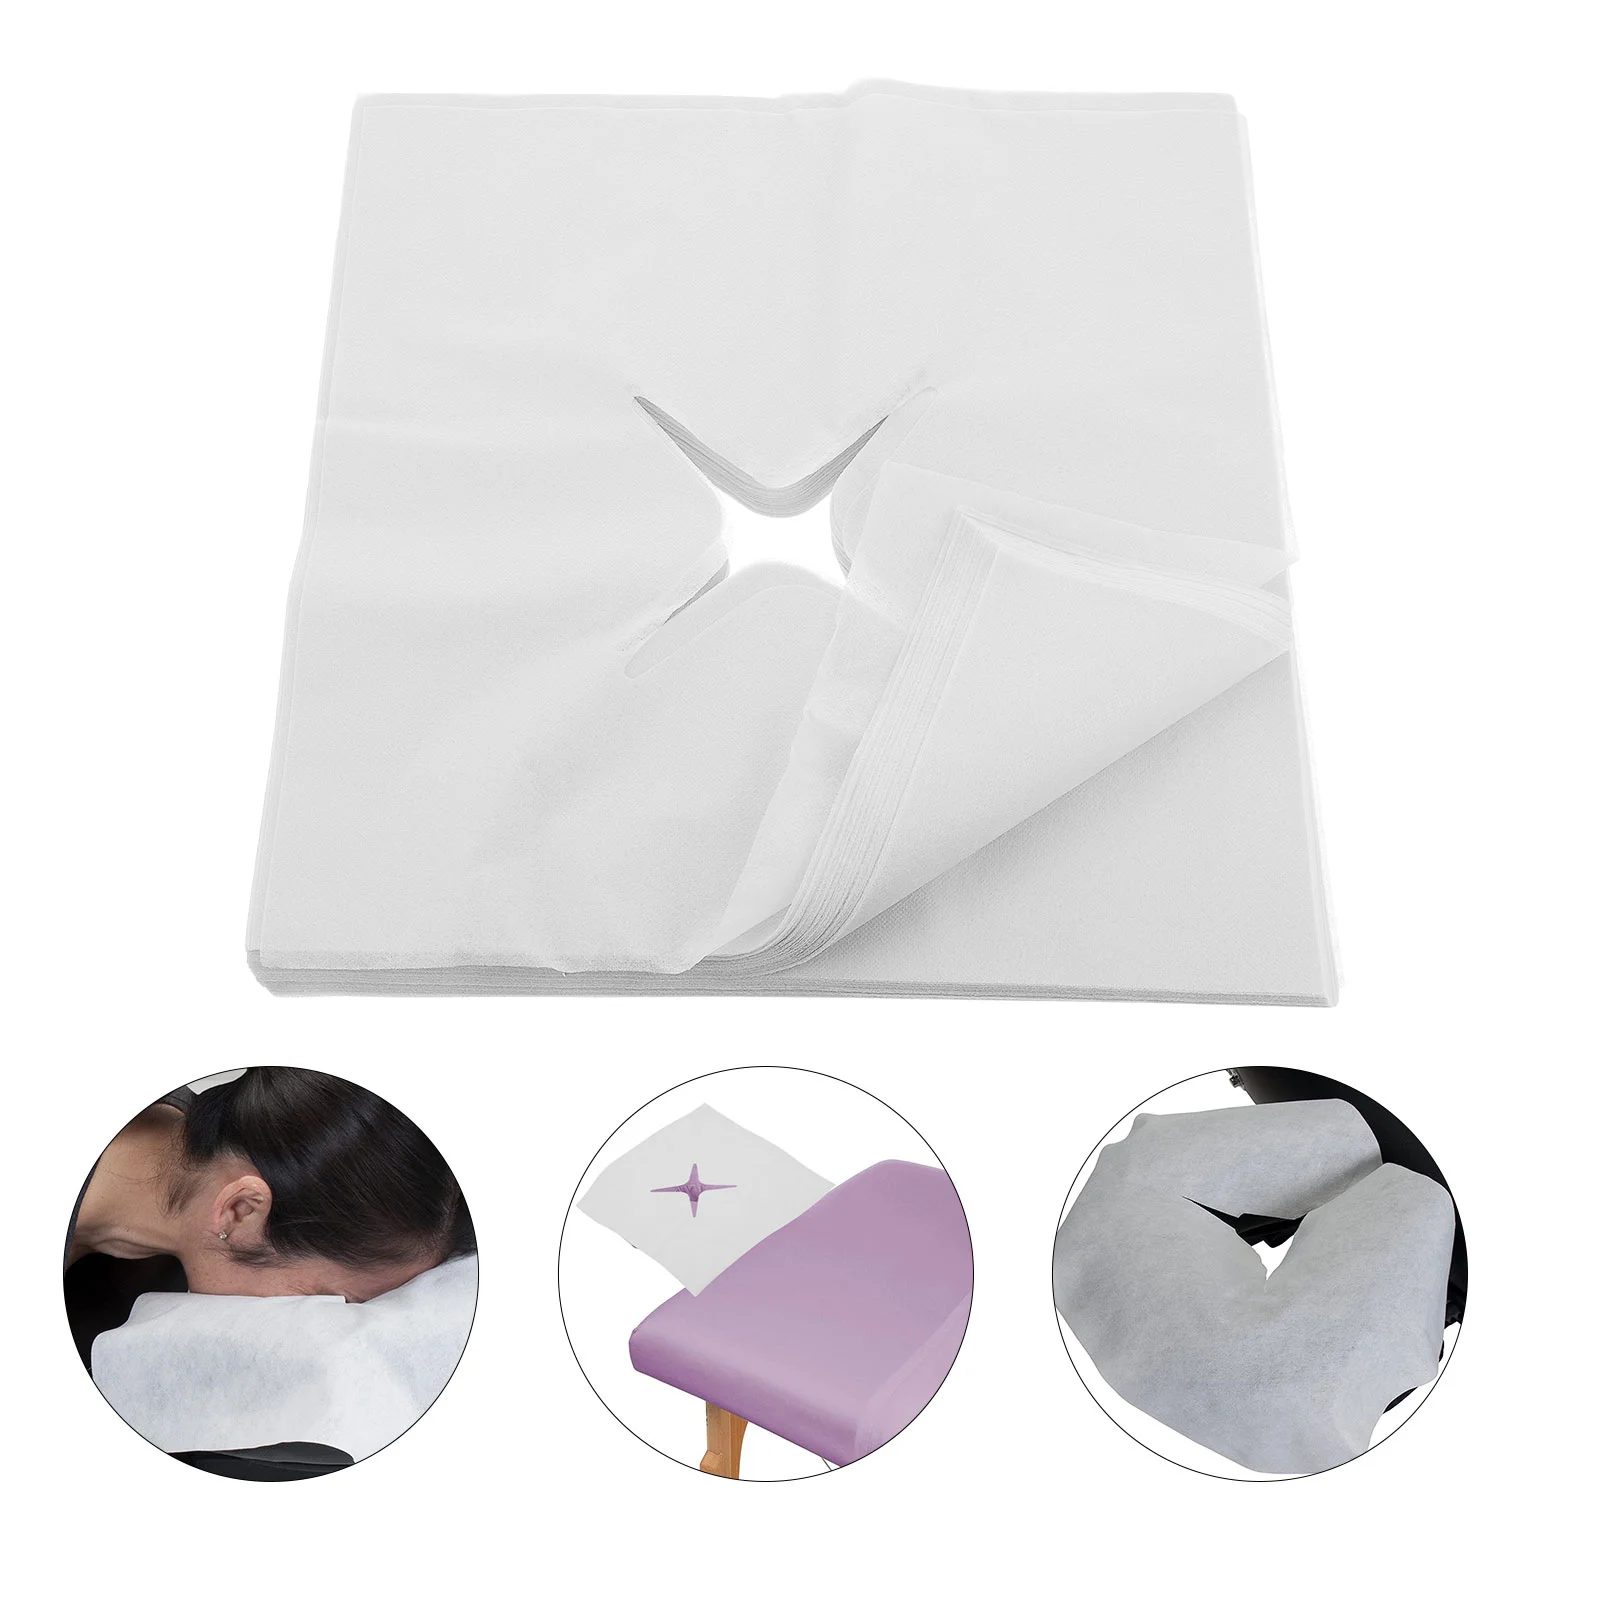 

100pcs Table Headrest Pad Pillow Covers Covers Cradle Covers Non Sticking for Tables Chairs ( White )